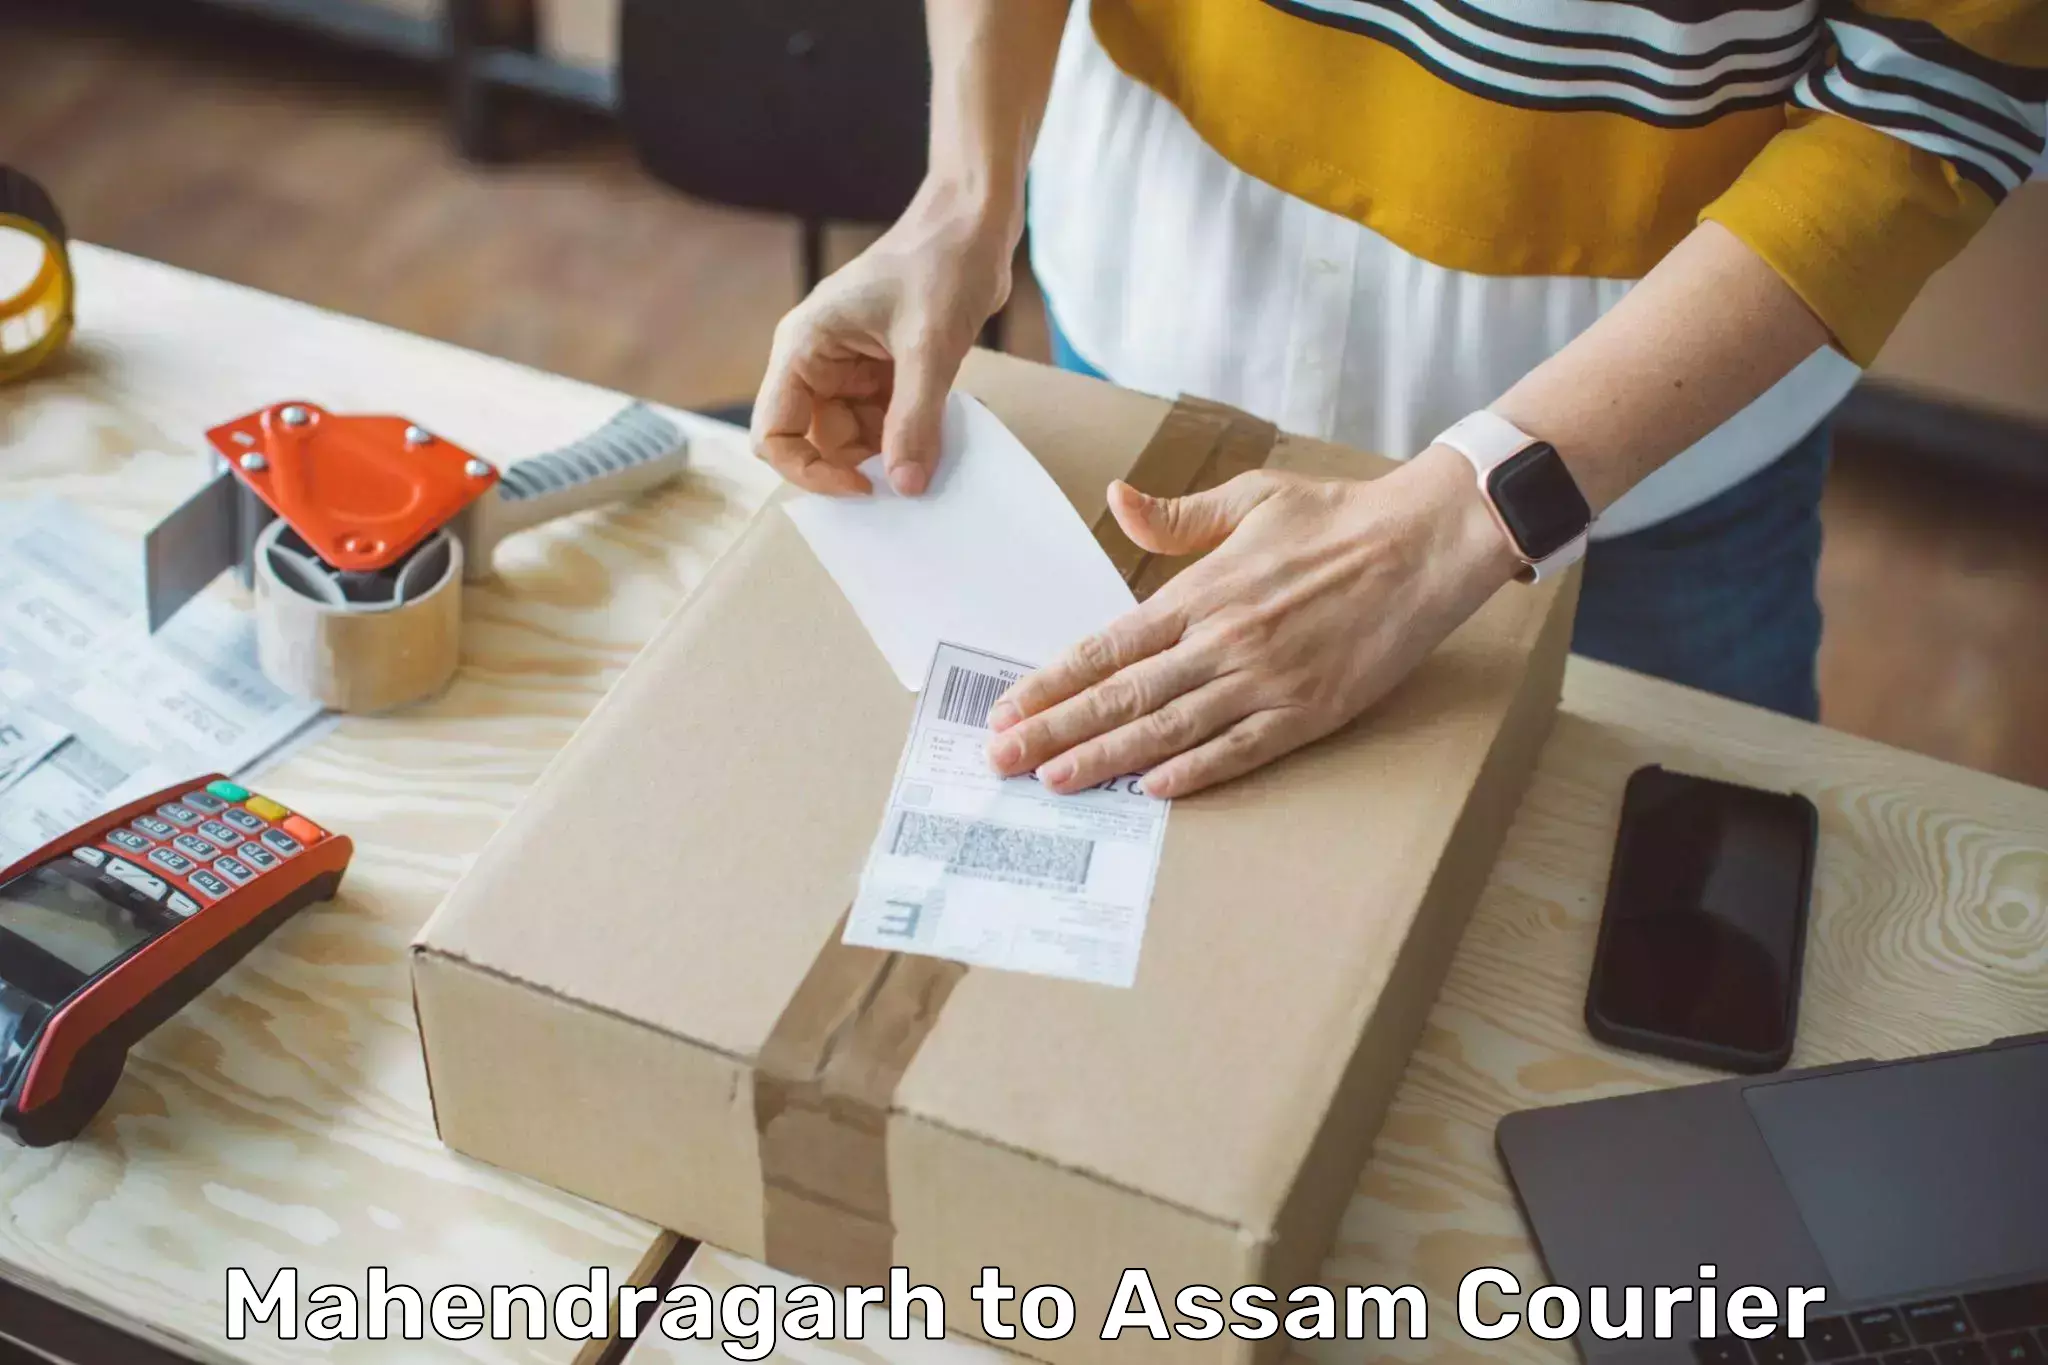 Urgent courier needs Mahendragarh to Silchar